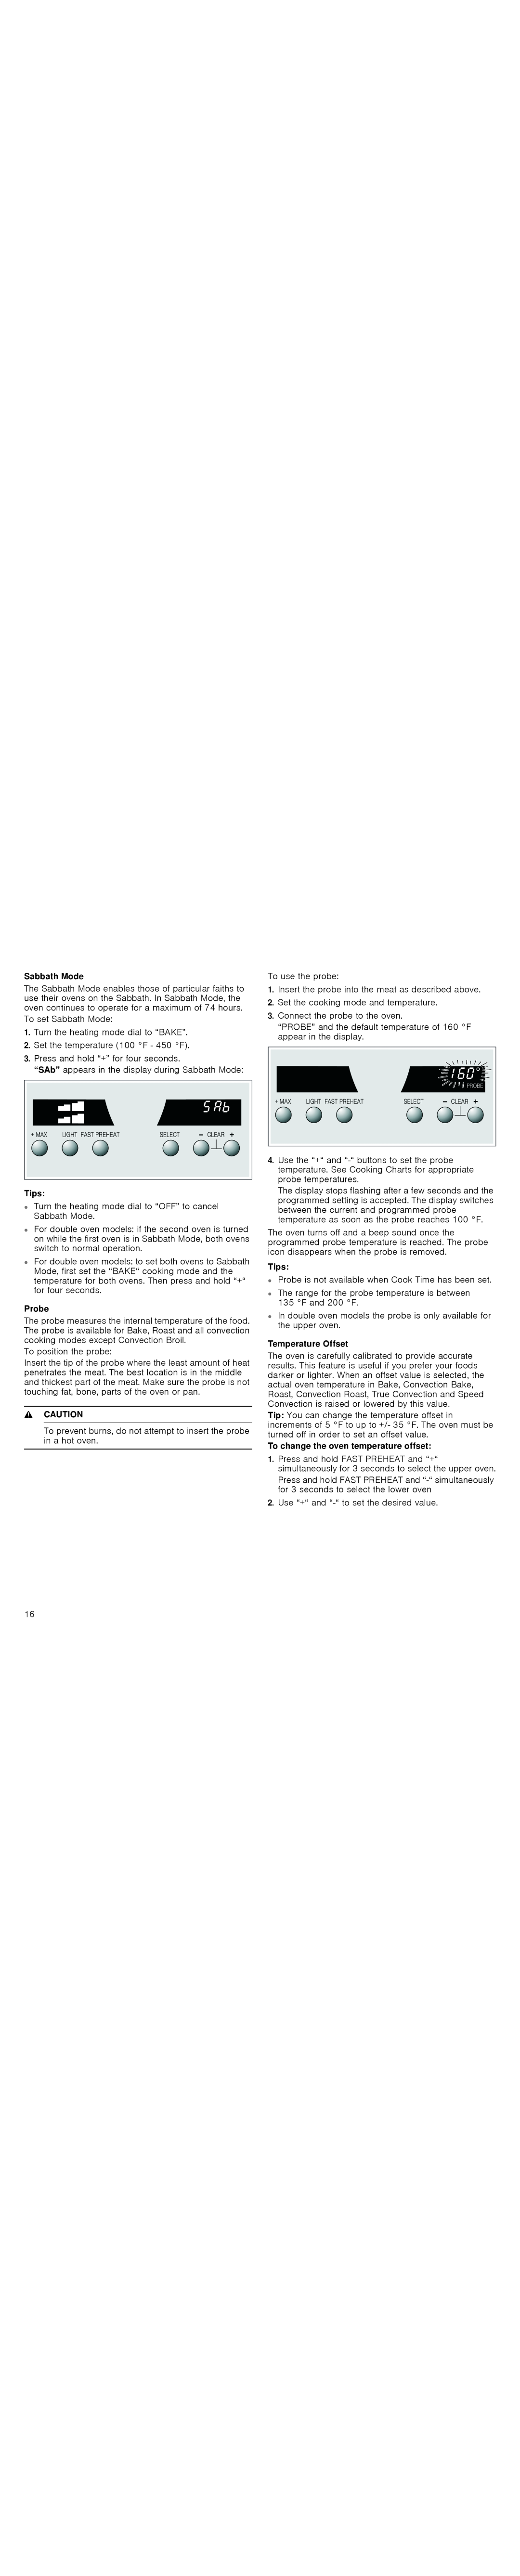 Thermador PODM301J, POD301J Sabbath Mode, Temperature Offset, To change the oven temperature offset, Tips, Probe, Caution 